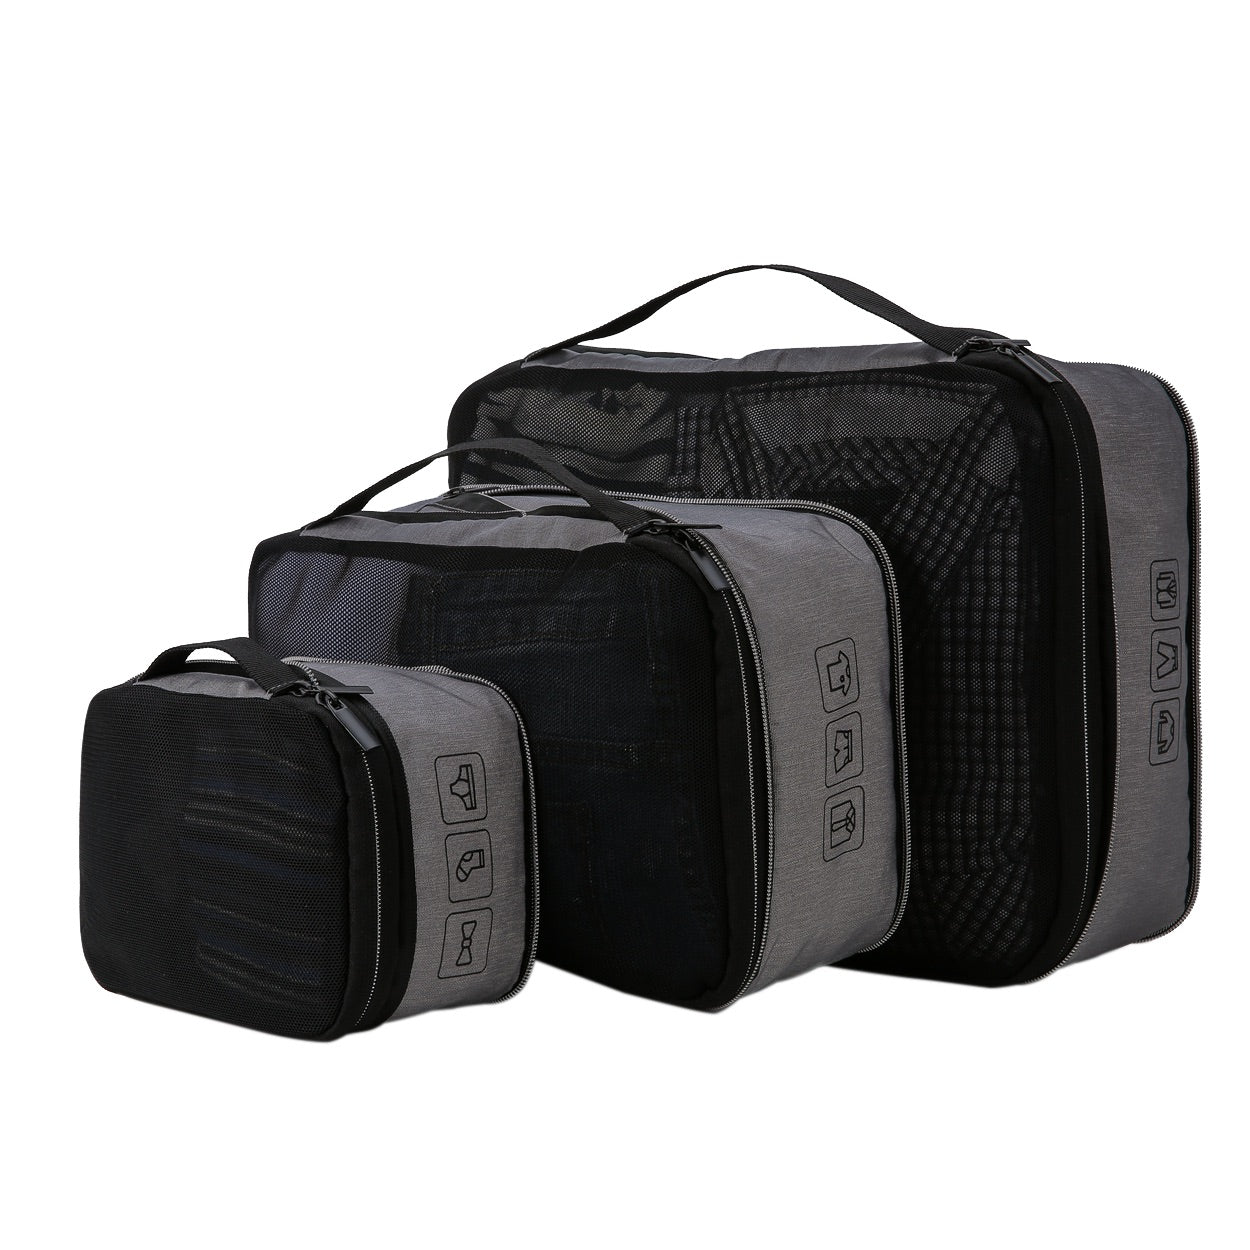 GILBANO travel compression packing cubes